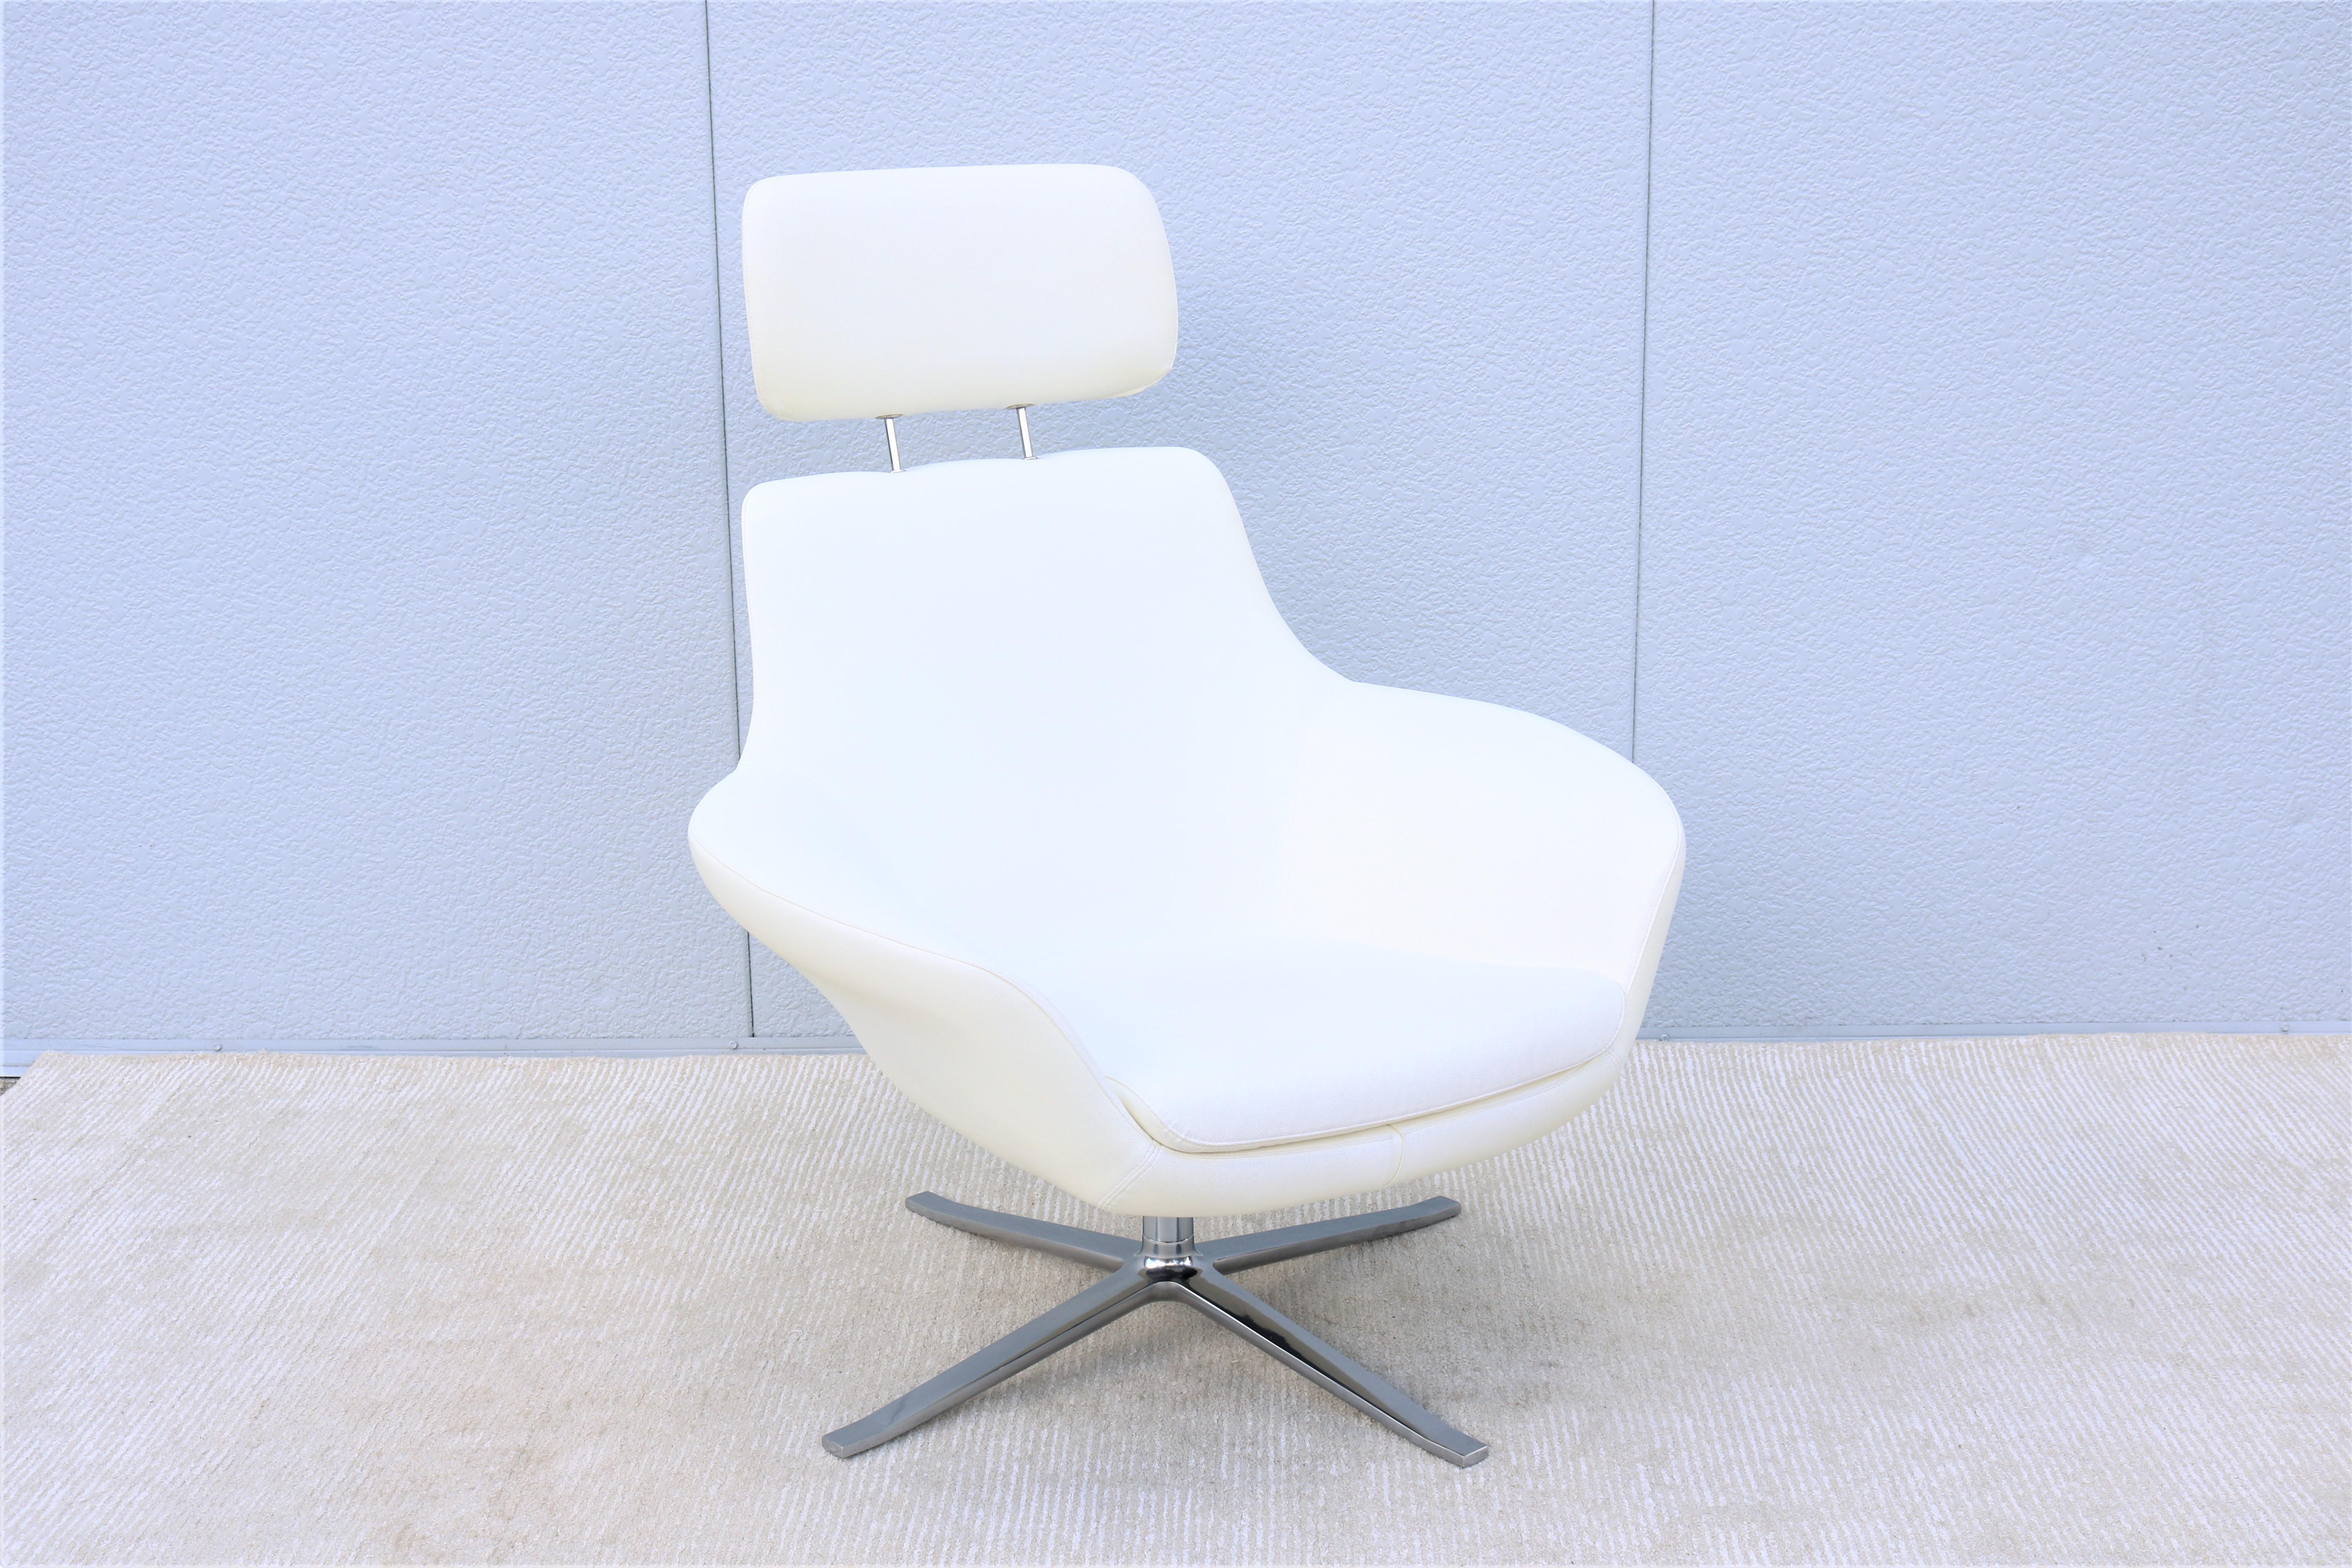 The Modern beauty and smart design of the Bob lounge chair fit seamlessly into any environment and among Mid-Century classic designs.
An elegant yet contemporary masterpiece that's comfortable and well-designed, a well-crafted beauty for the modern